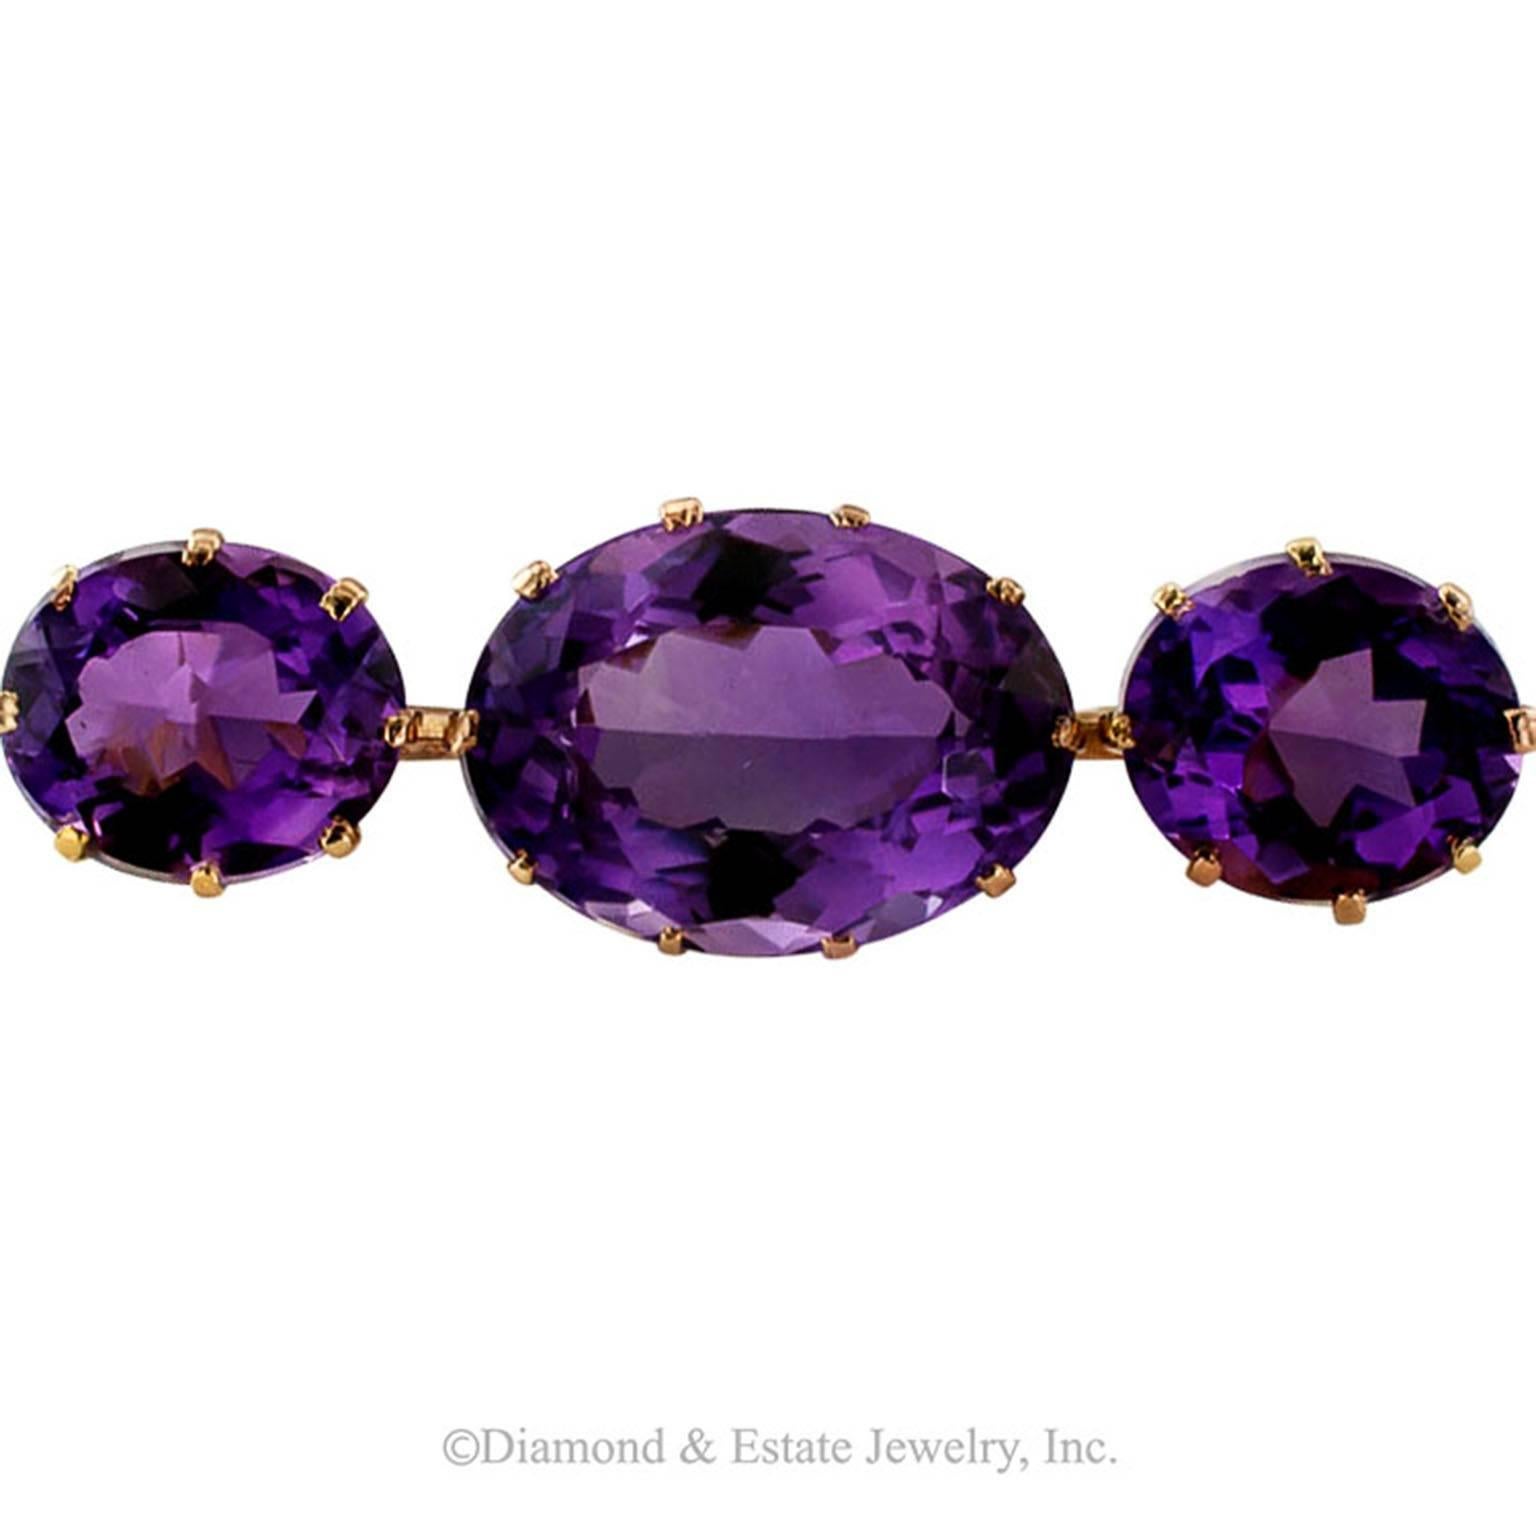 Victorian Larger Amethyst Bar Brooch

Royal purple amethyst and that is all that there is to it!  A good size brooch formed by the linear arrangement of a trio of well matched stones that total approximately 34.00 carats, mounted in 18 karat gold.